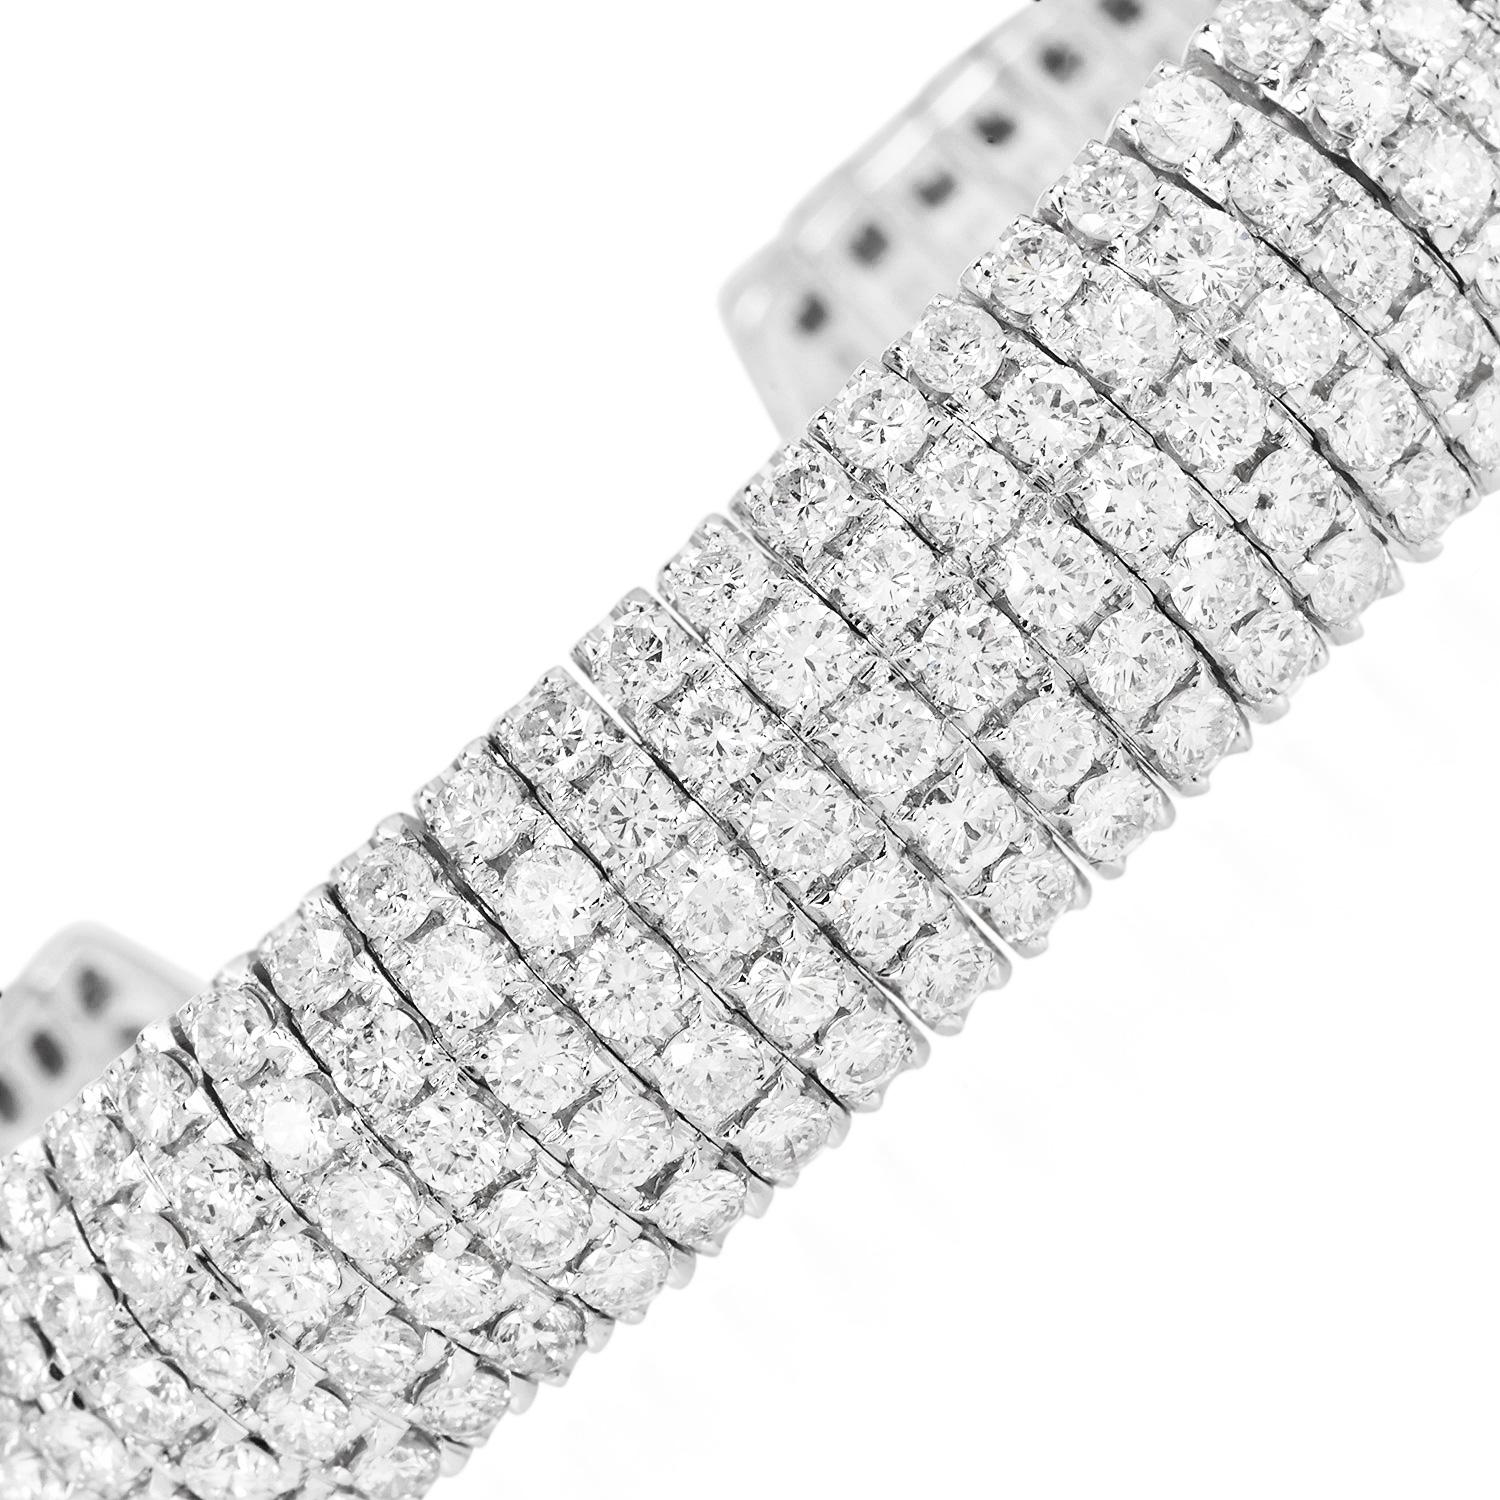 This Exquisite 18K white gold cuff bracelet, is a luxurious symphony of 15.72 carats of precision-set diamonds across five rows.

This open-cuff design is classic glamour with contemporary flair, creating an opulent statement piece.

It's a